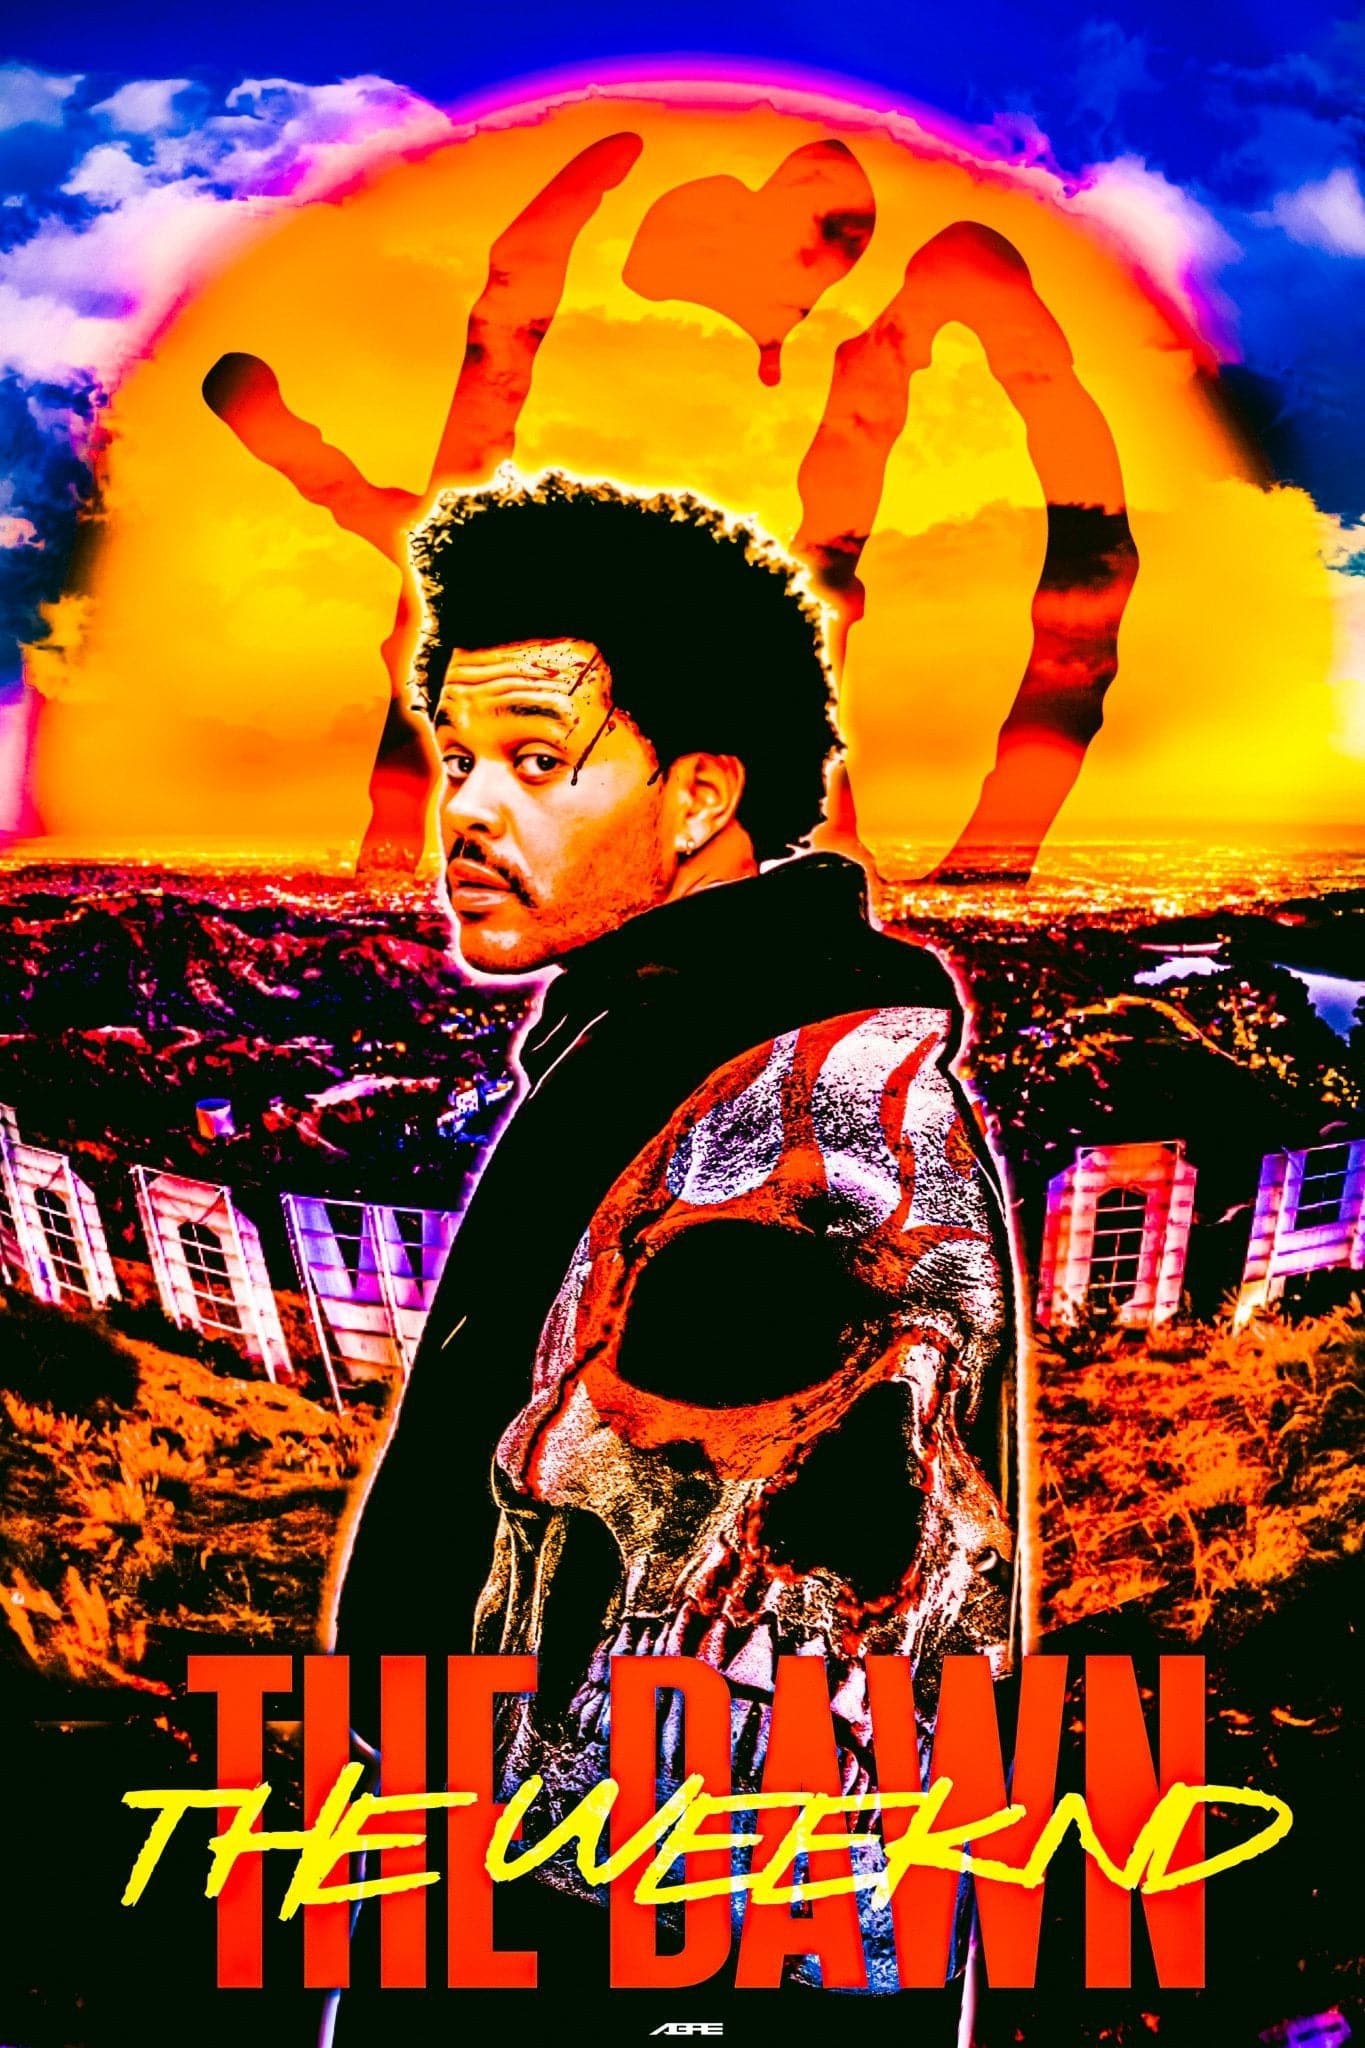 The Weeknd ‘The Dawn’ Poster - Posters Plug